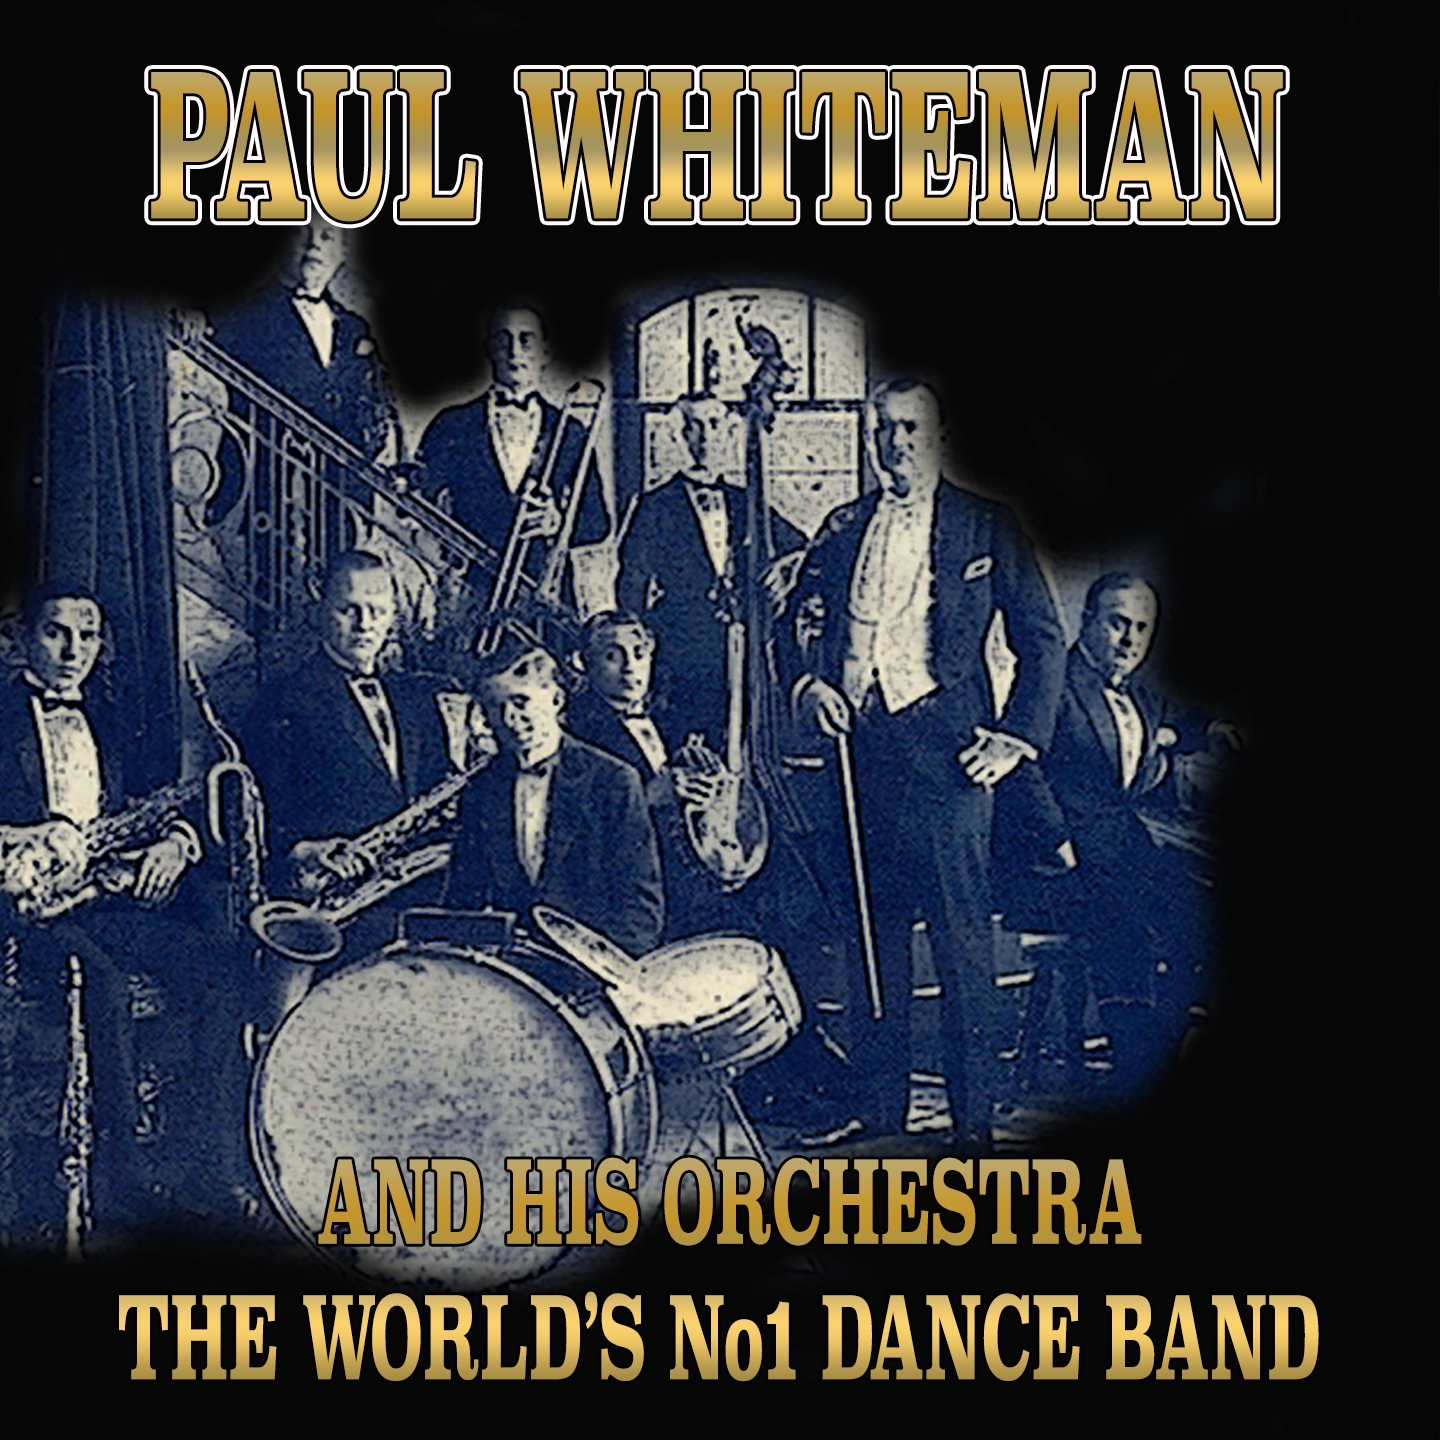 2- Paul Whiteman and His Orchestra